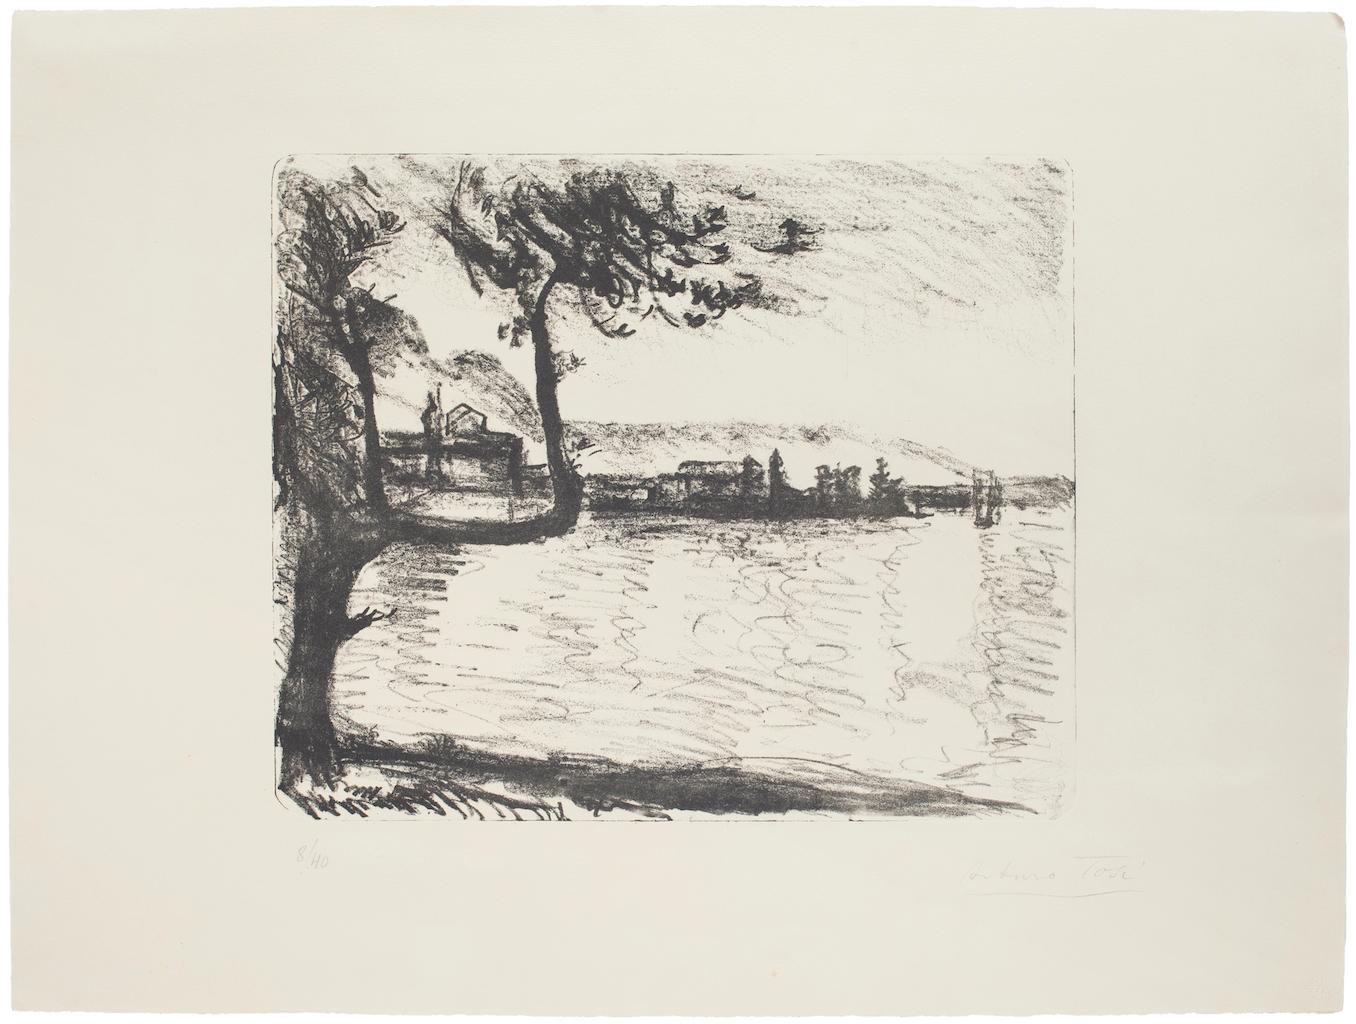 Landscape is an original lithography artwork realized by Arturo Tosi.

Hand-signed on the lower right in pencil.

Numbered, edition of 8/40 prints.

The state of preservation is good.

The artwork represents a beautiful scenery of a lake with a tree